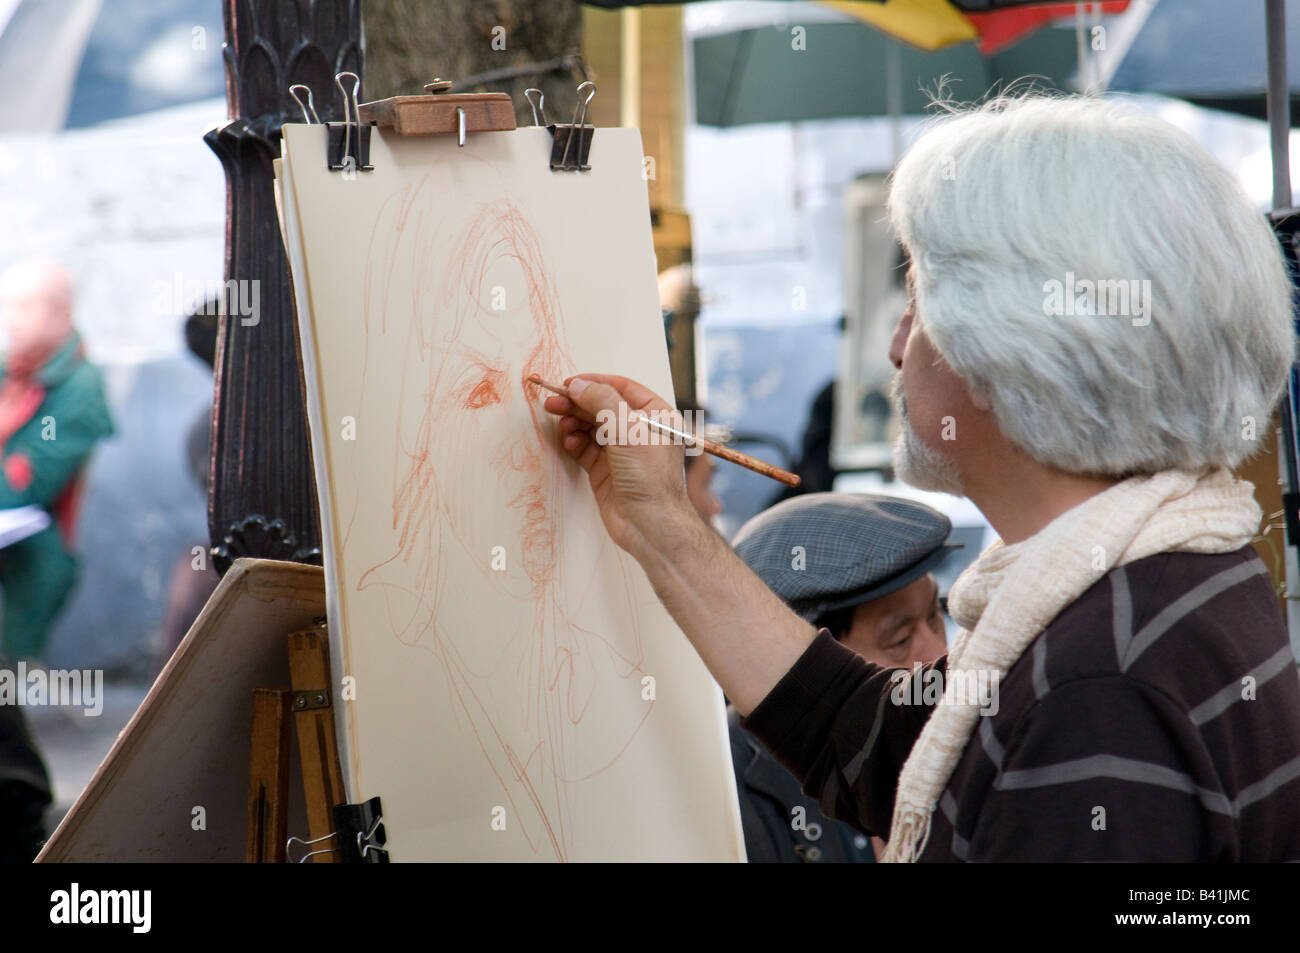 Painters in a square in Montmartre district in Paris, France Stock Photo